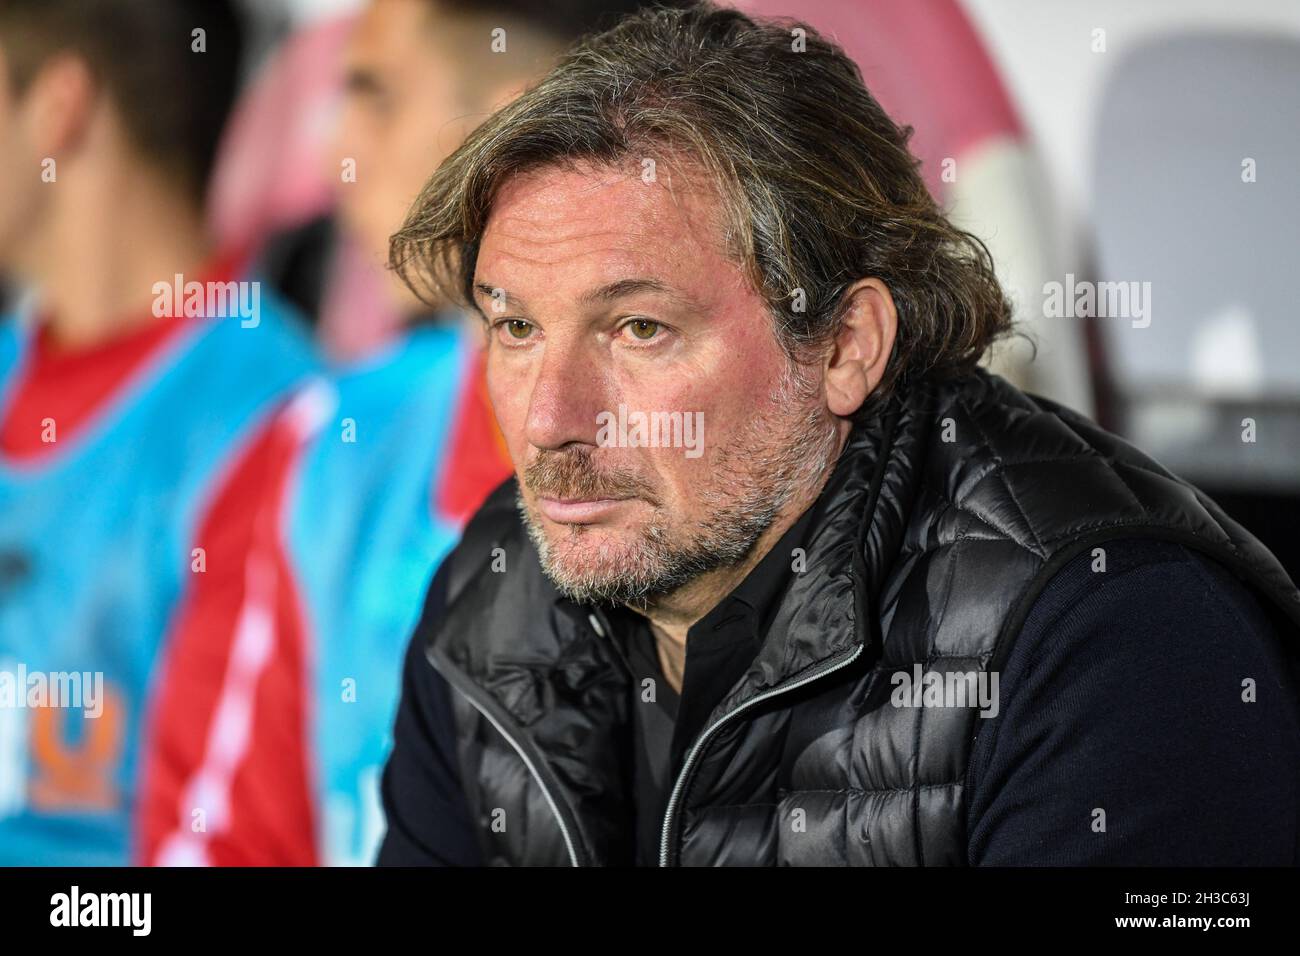 Vicenza, Italy. 27th Oct, 2021. Giovanni Stroppa (Head Coach AC Monza) during LR Vicenza vs AC Monza, Italian Football Championship League BKT in Vicenza, Italy, October 27 2021 Credit: Independent Photo Agency/Alamy Live News Stock Photo